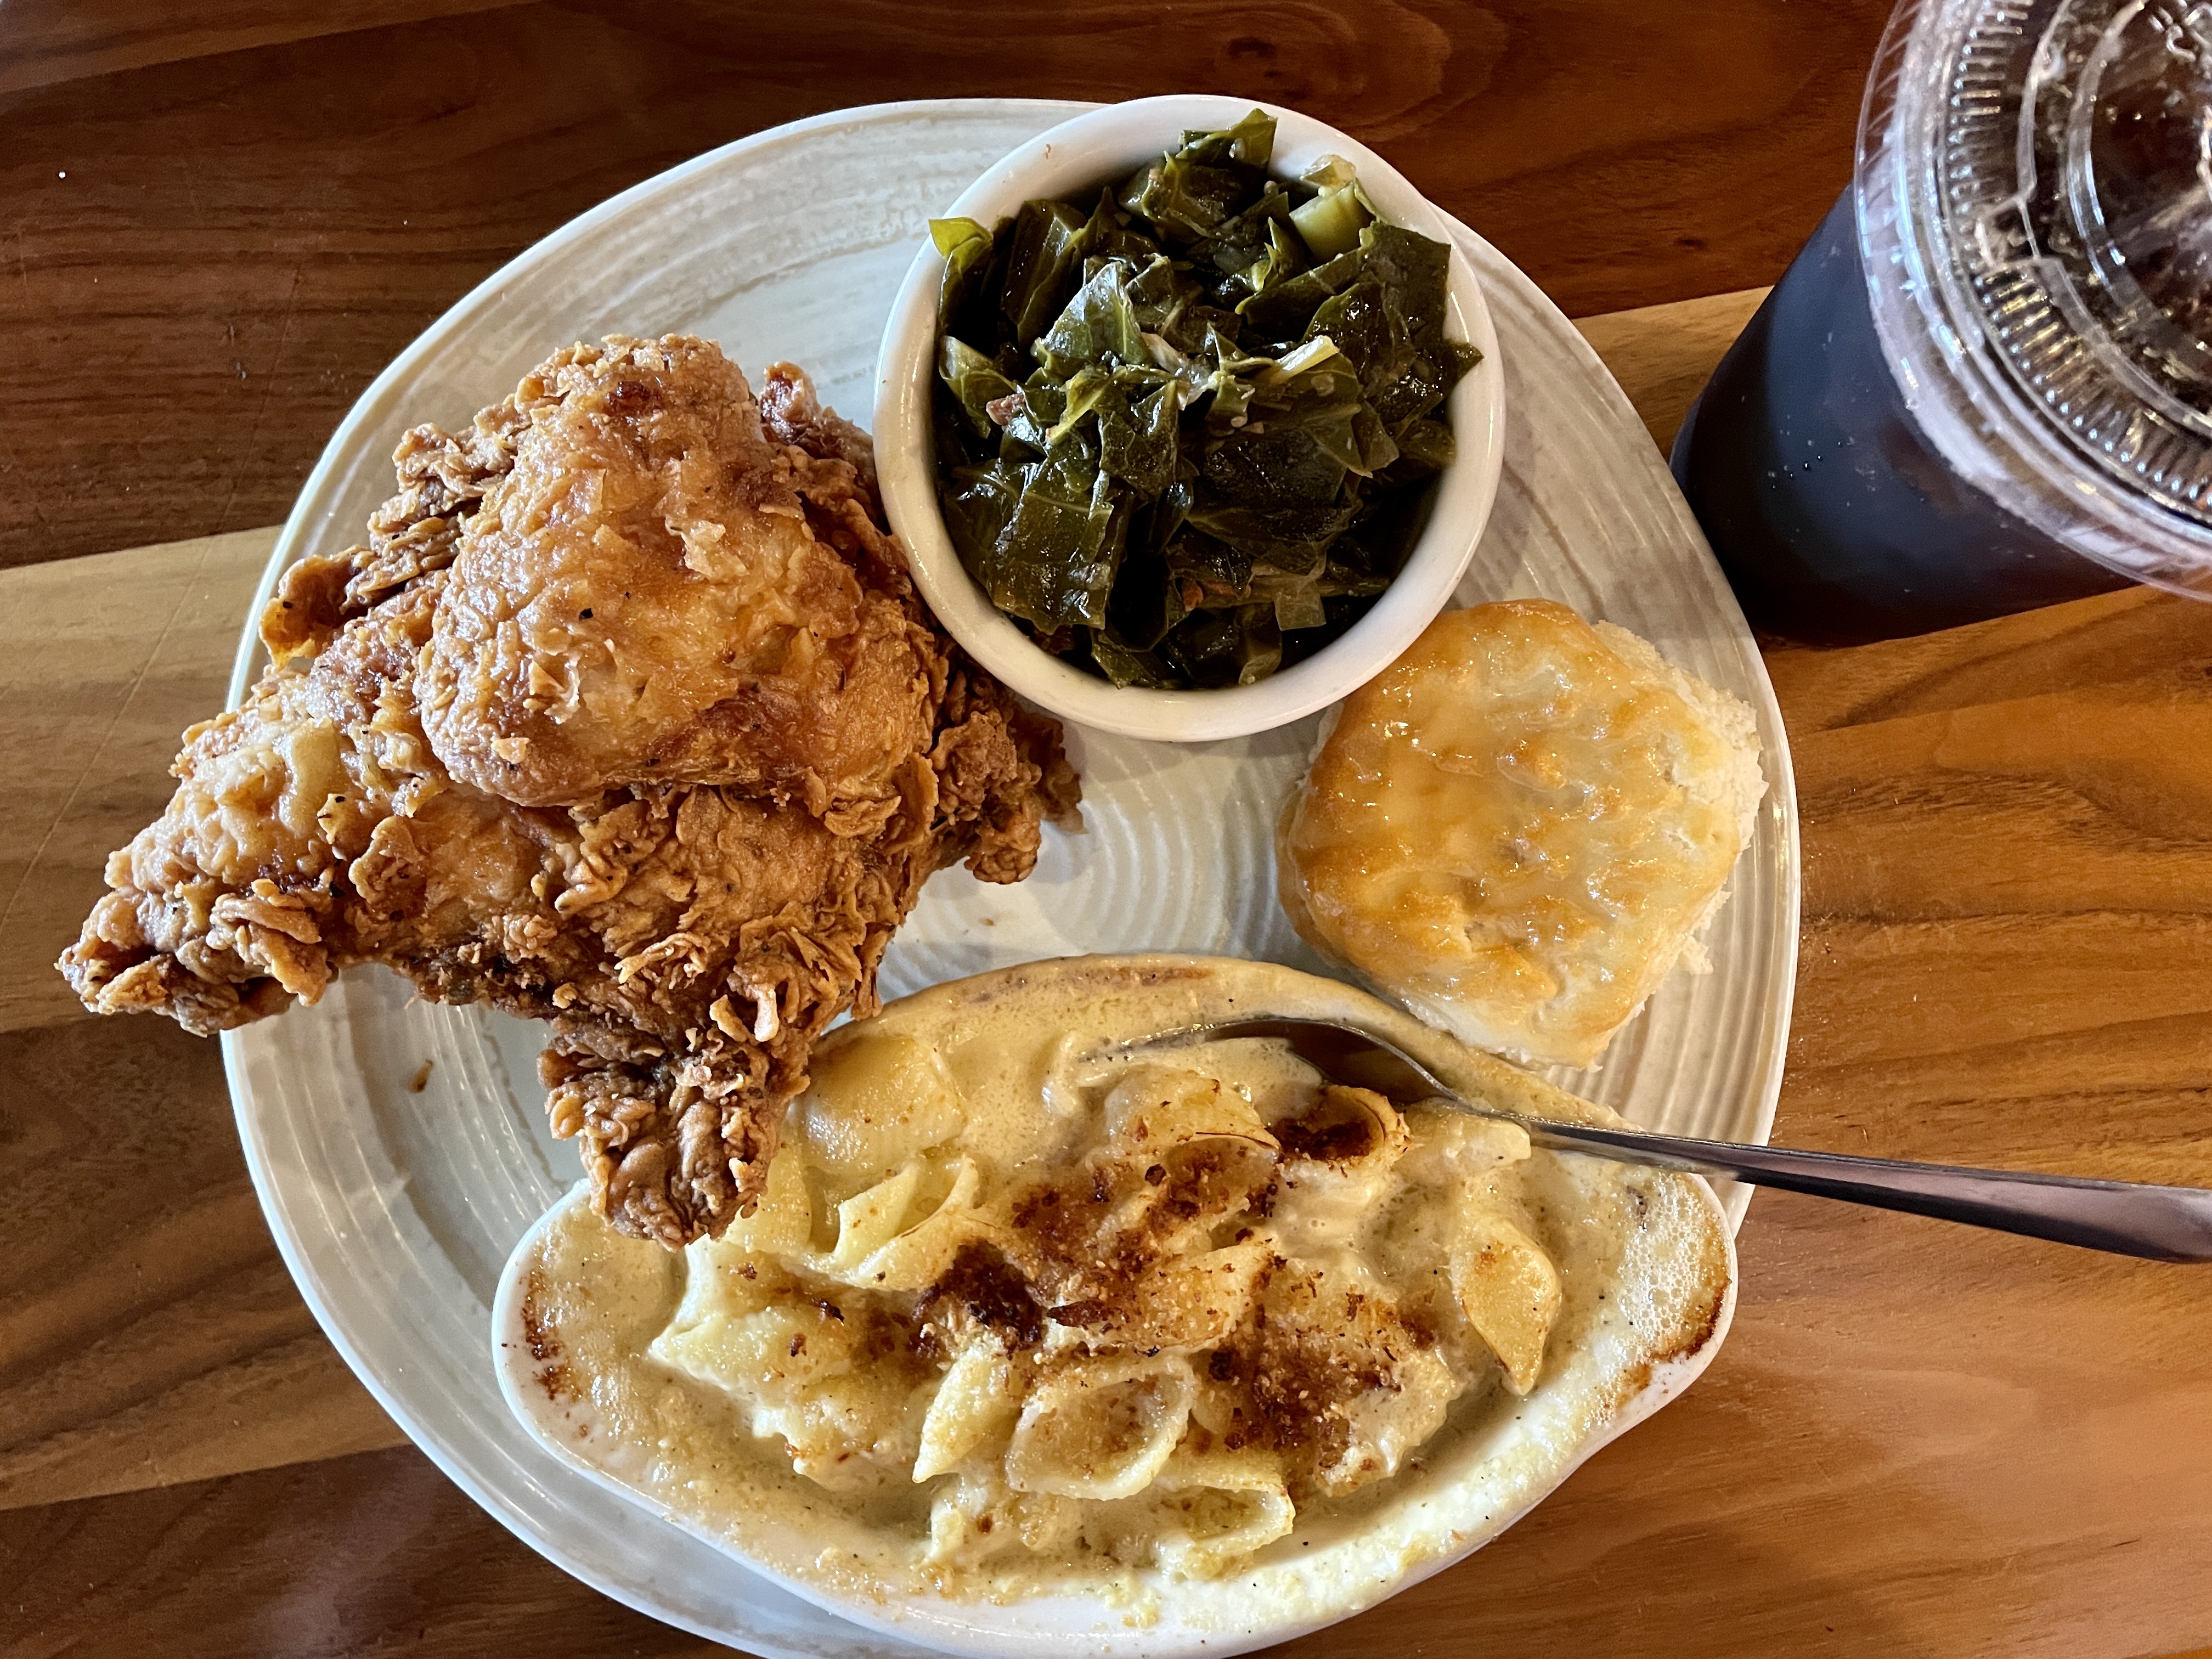 A thick platter holds two pieces of fried chicken, a small bowl of greens, and a dish of mac and cheese with a fork in it. To the right is a plastic glass of soda.